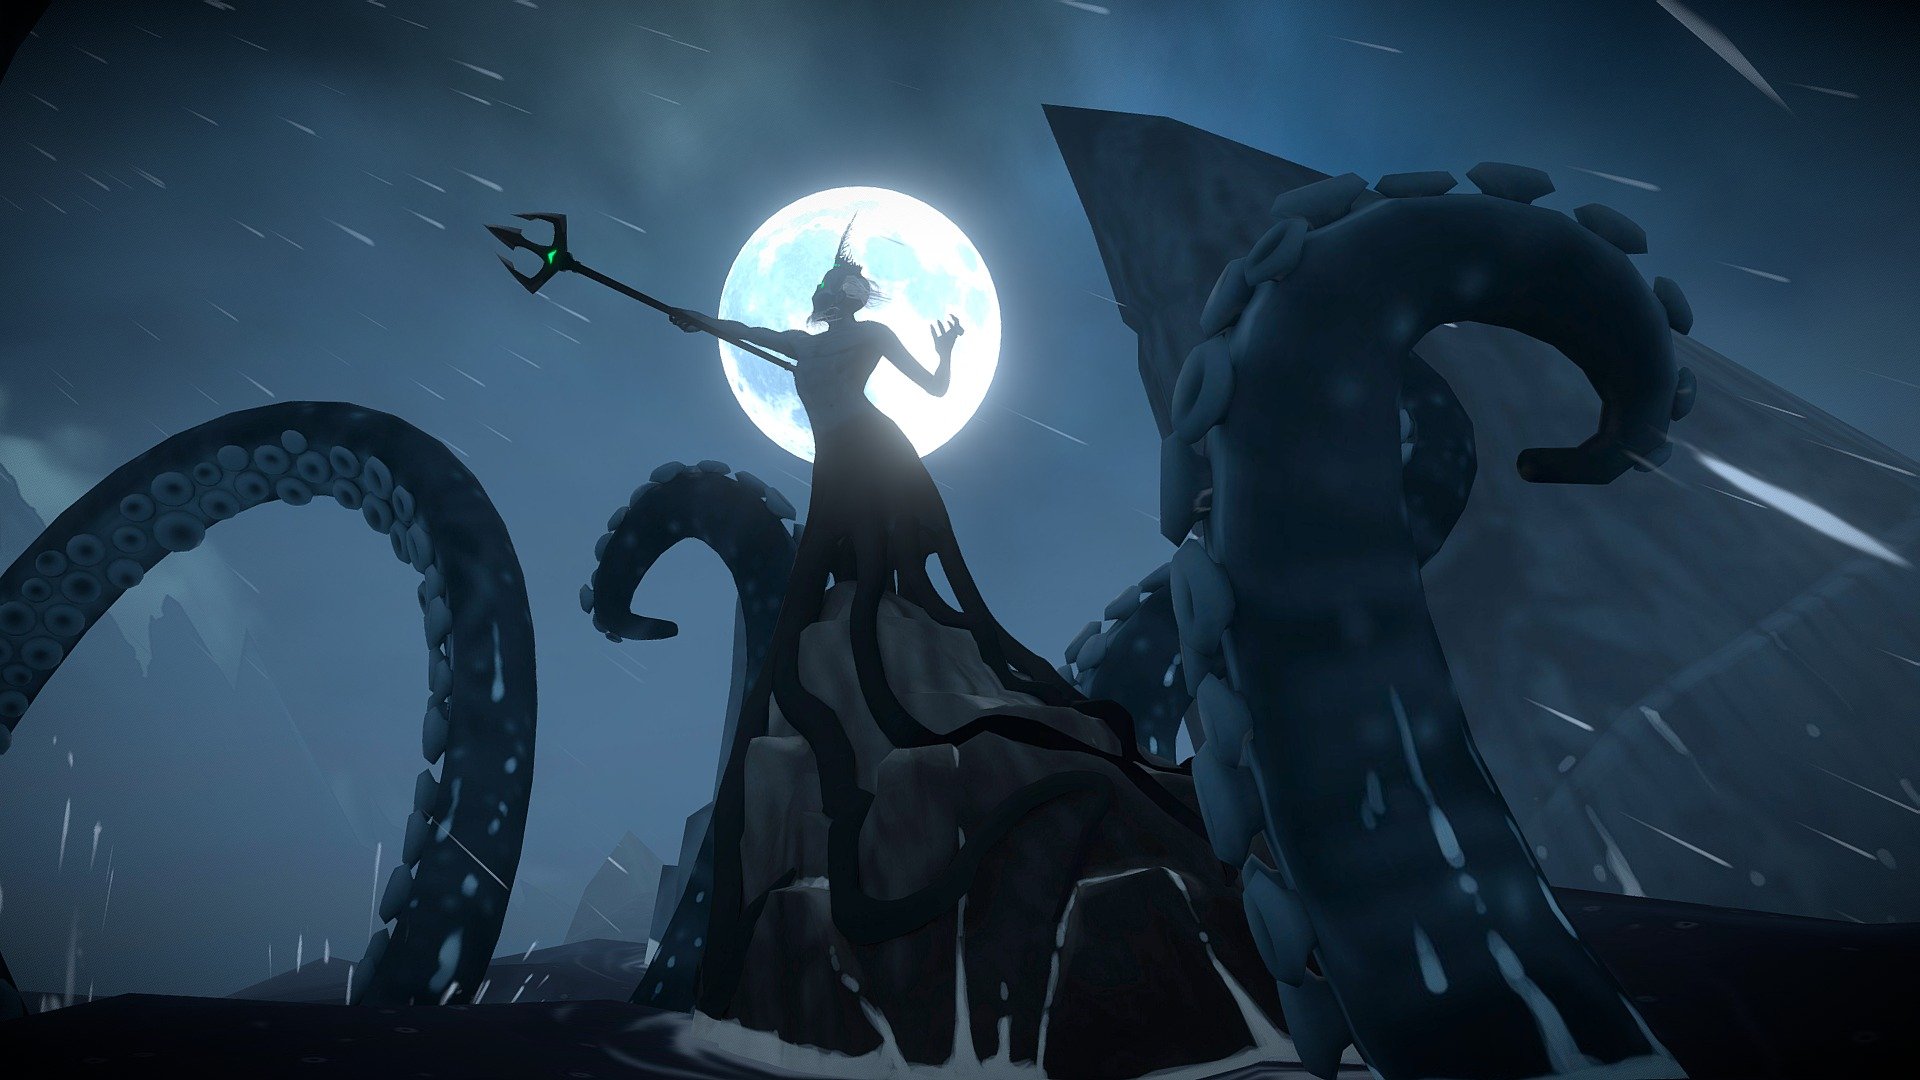 A new personal project that I made in my spare time - a scene of an Octopus King summoning his creation for an epic confrontation. Made with Maya, Zbrush and Photoshop 3d model